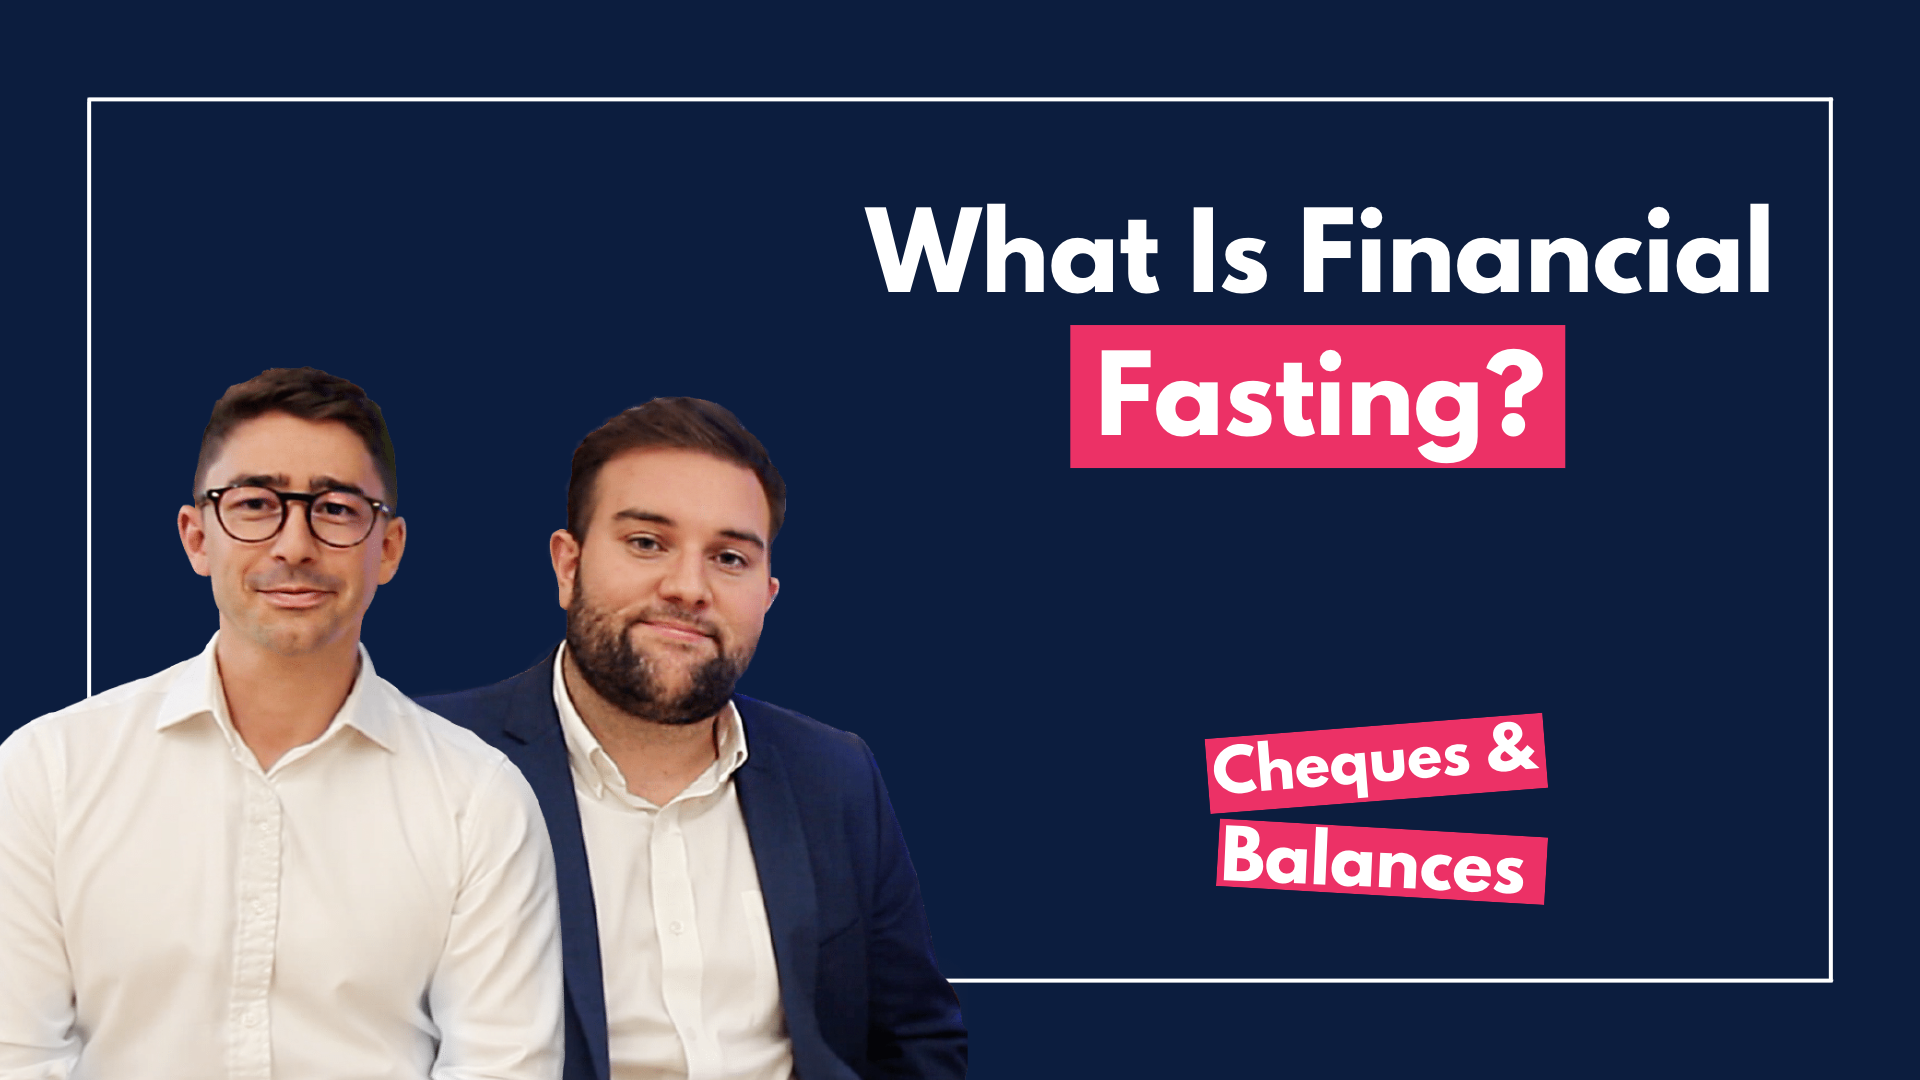 What Is Financial Fasting? We Explore The Trend